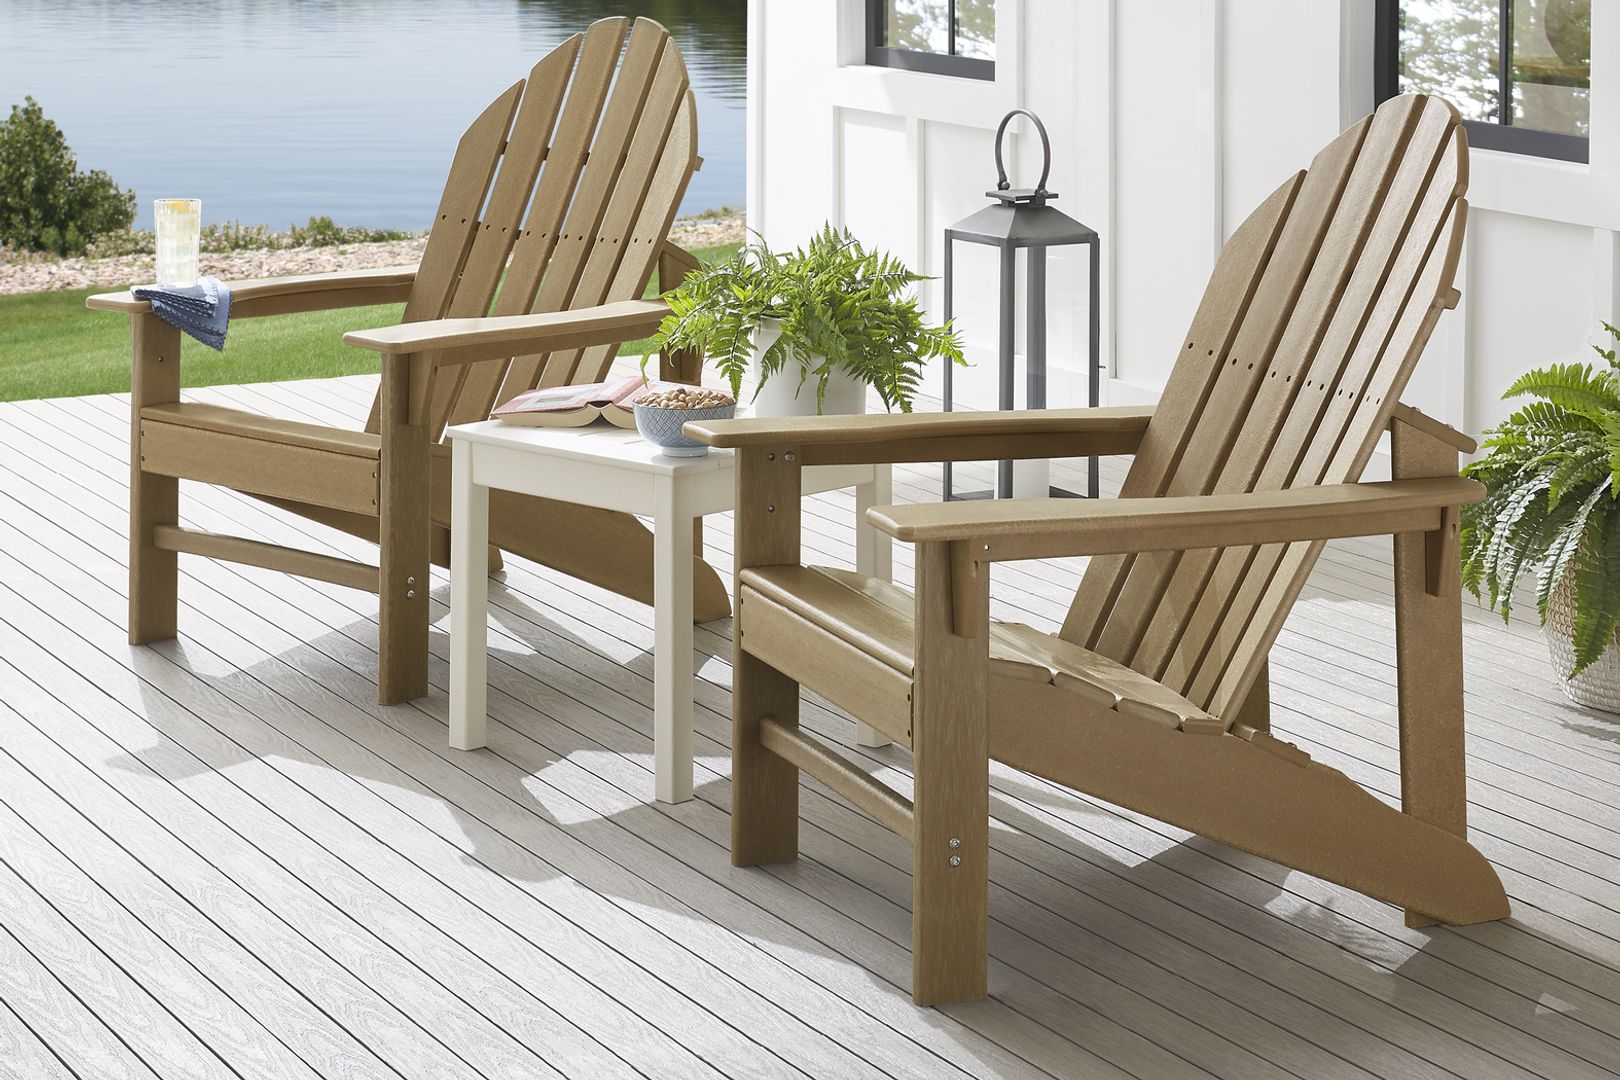 Photo of a pair of brown wooden Adirondack chairs with a white side table